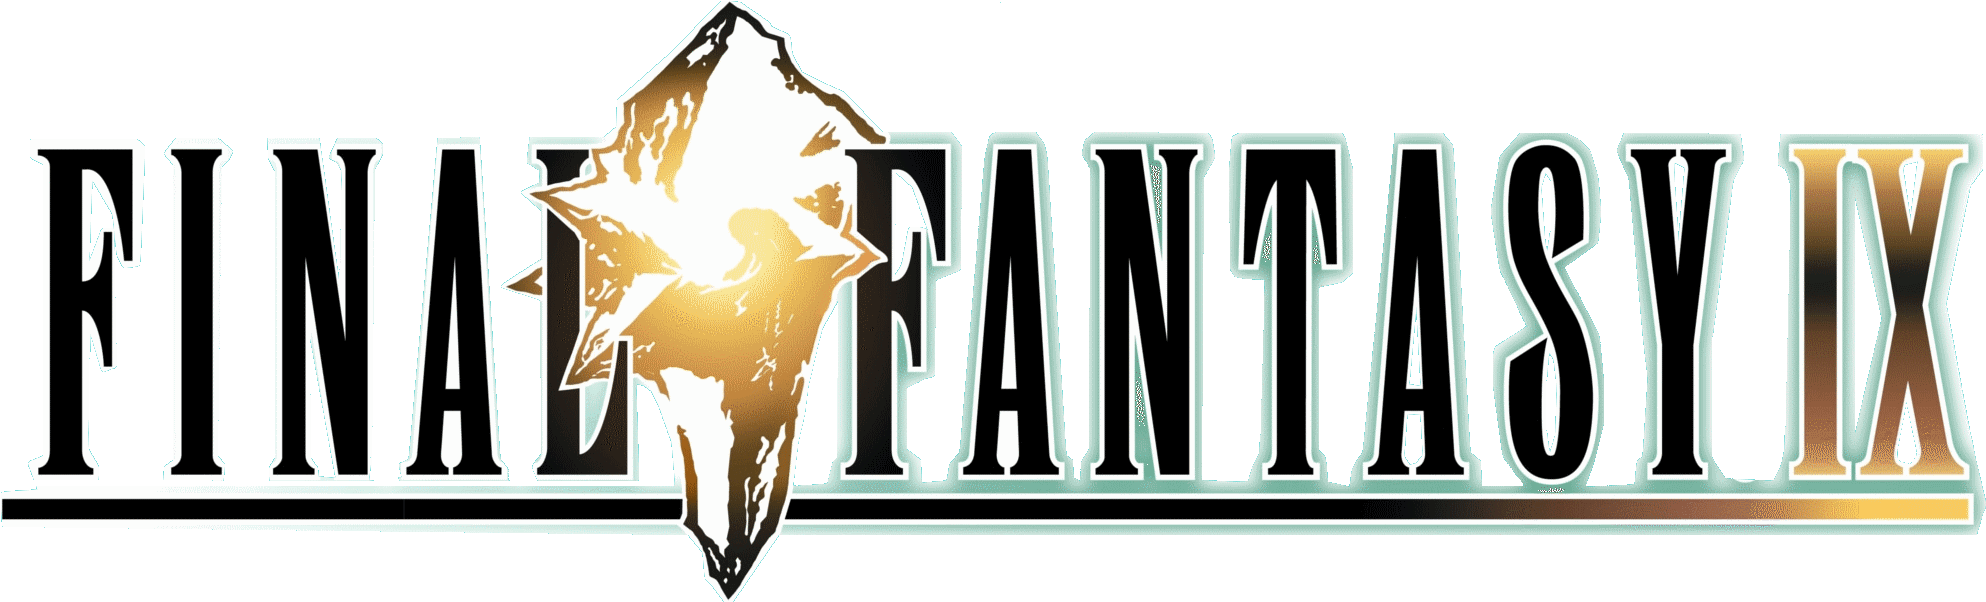 Download Final Fantasy Ix Logo Png Image With No Background